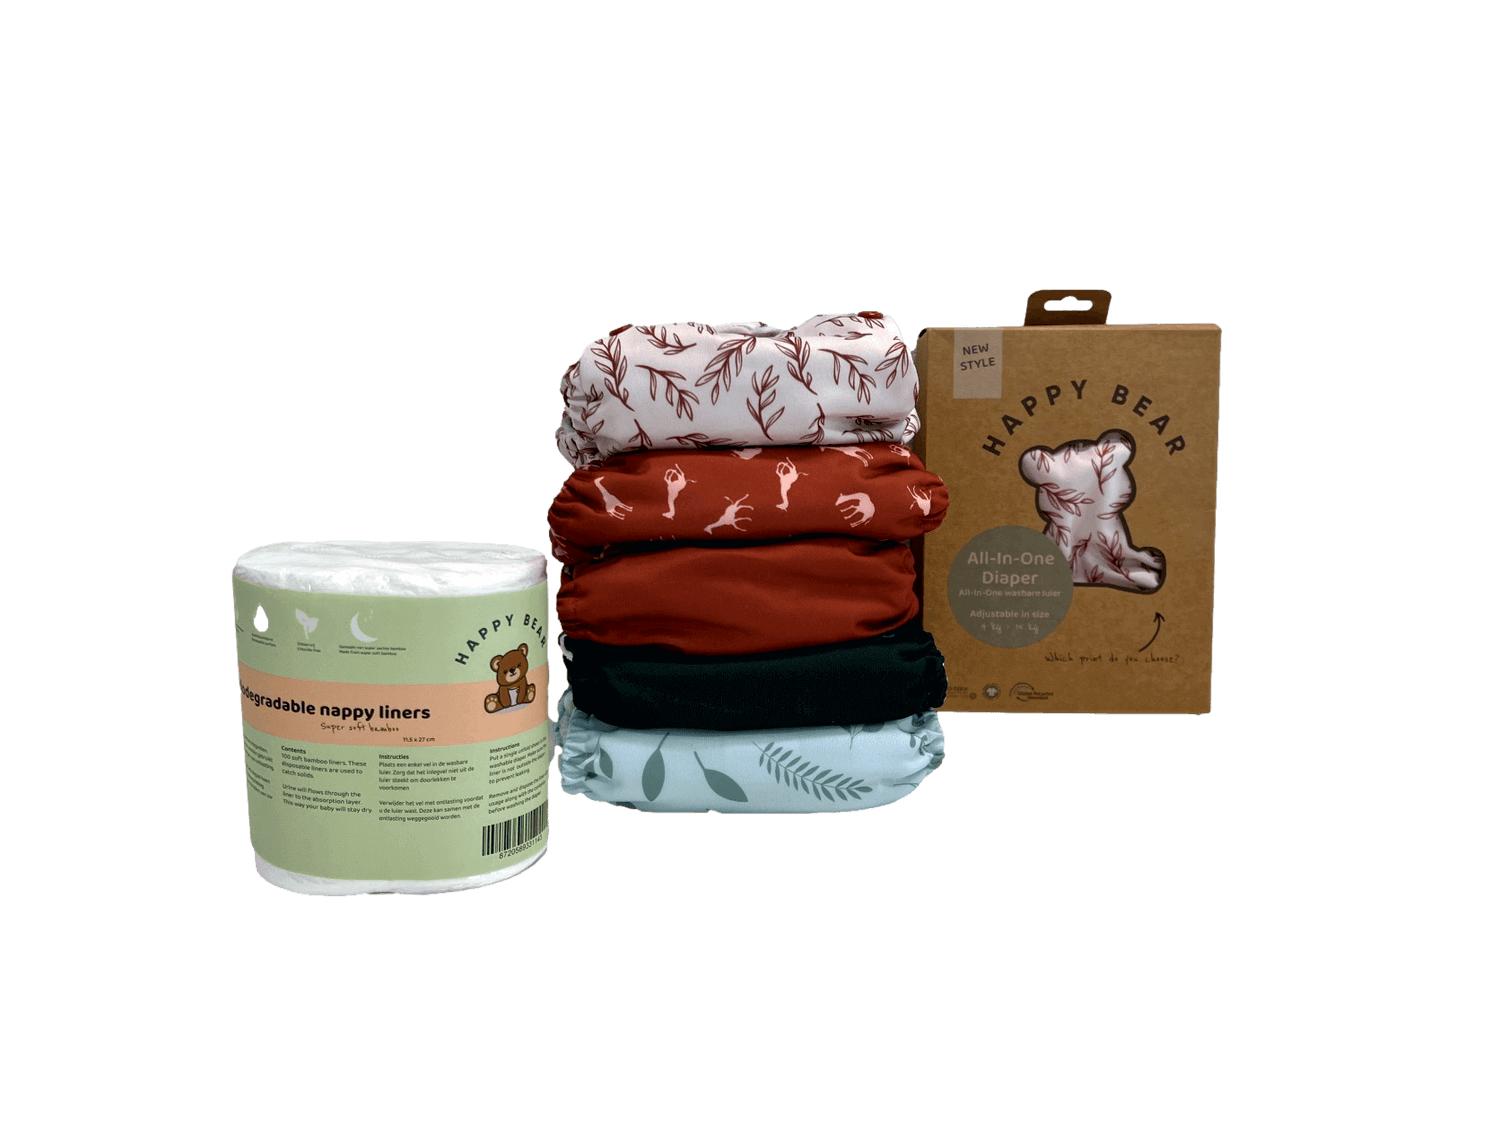 Washable Day Diaper package